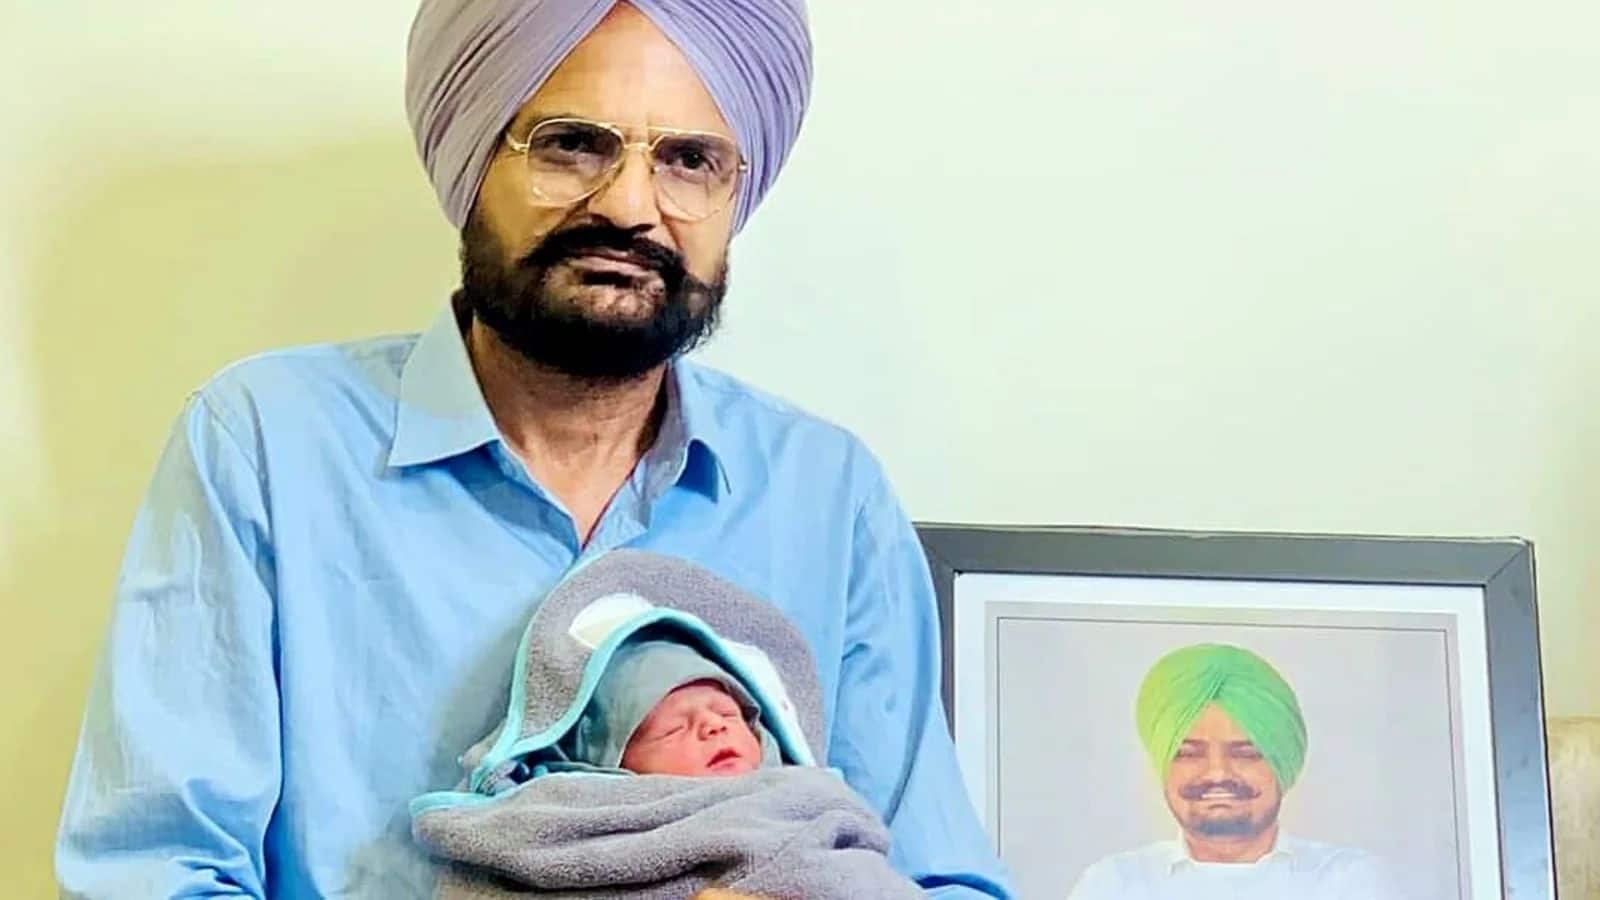 Sidhu Moose Wala's father levels harassment accusations against Punjab government